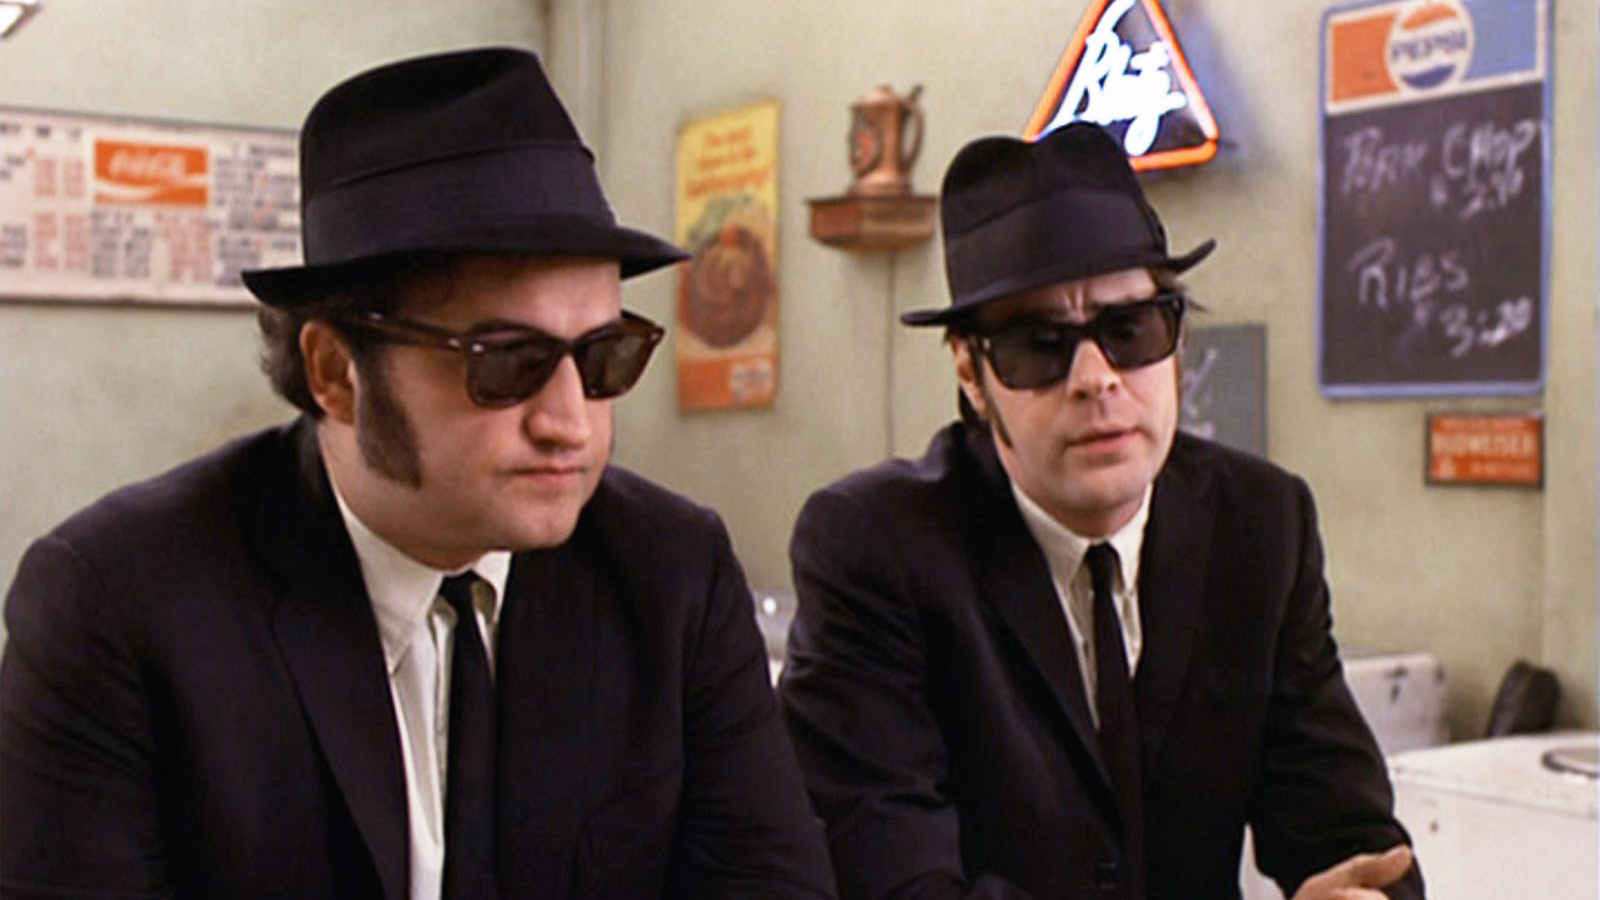 Blues Brothers Four Whole Fried Chickens